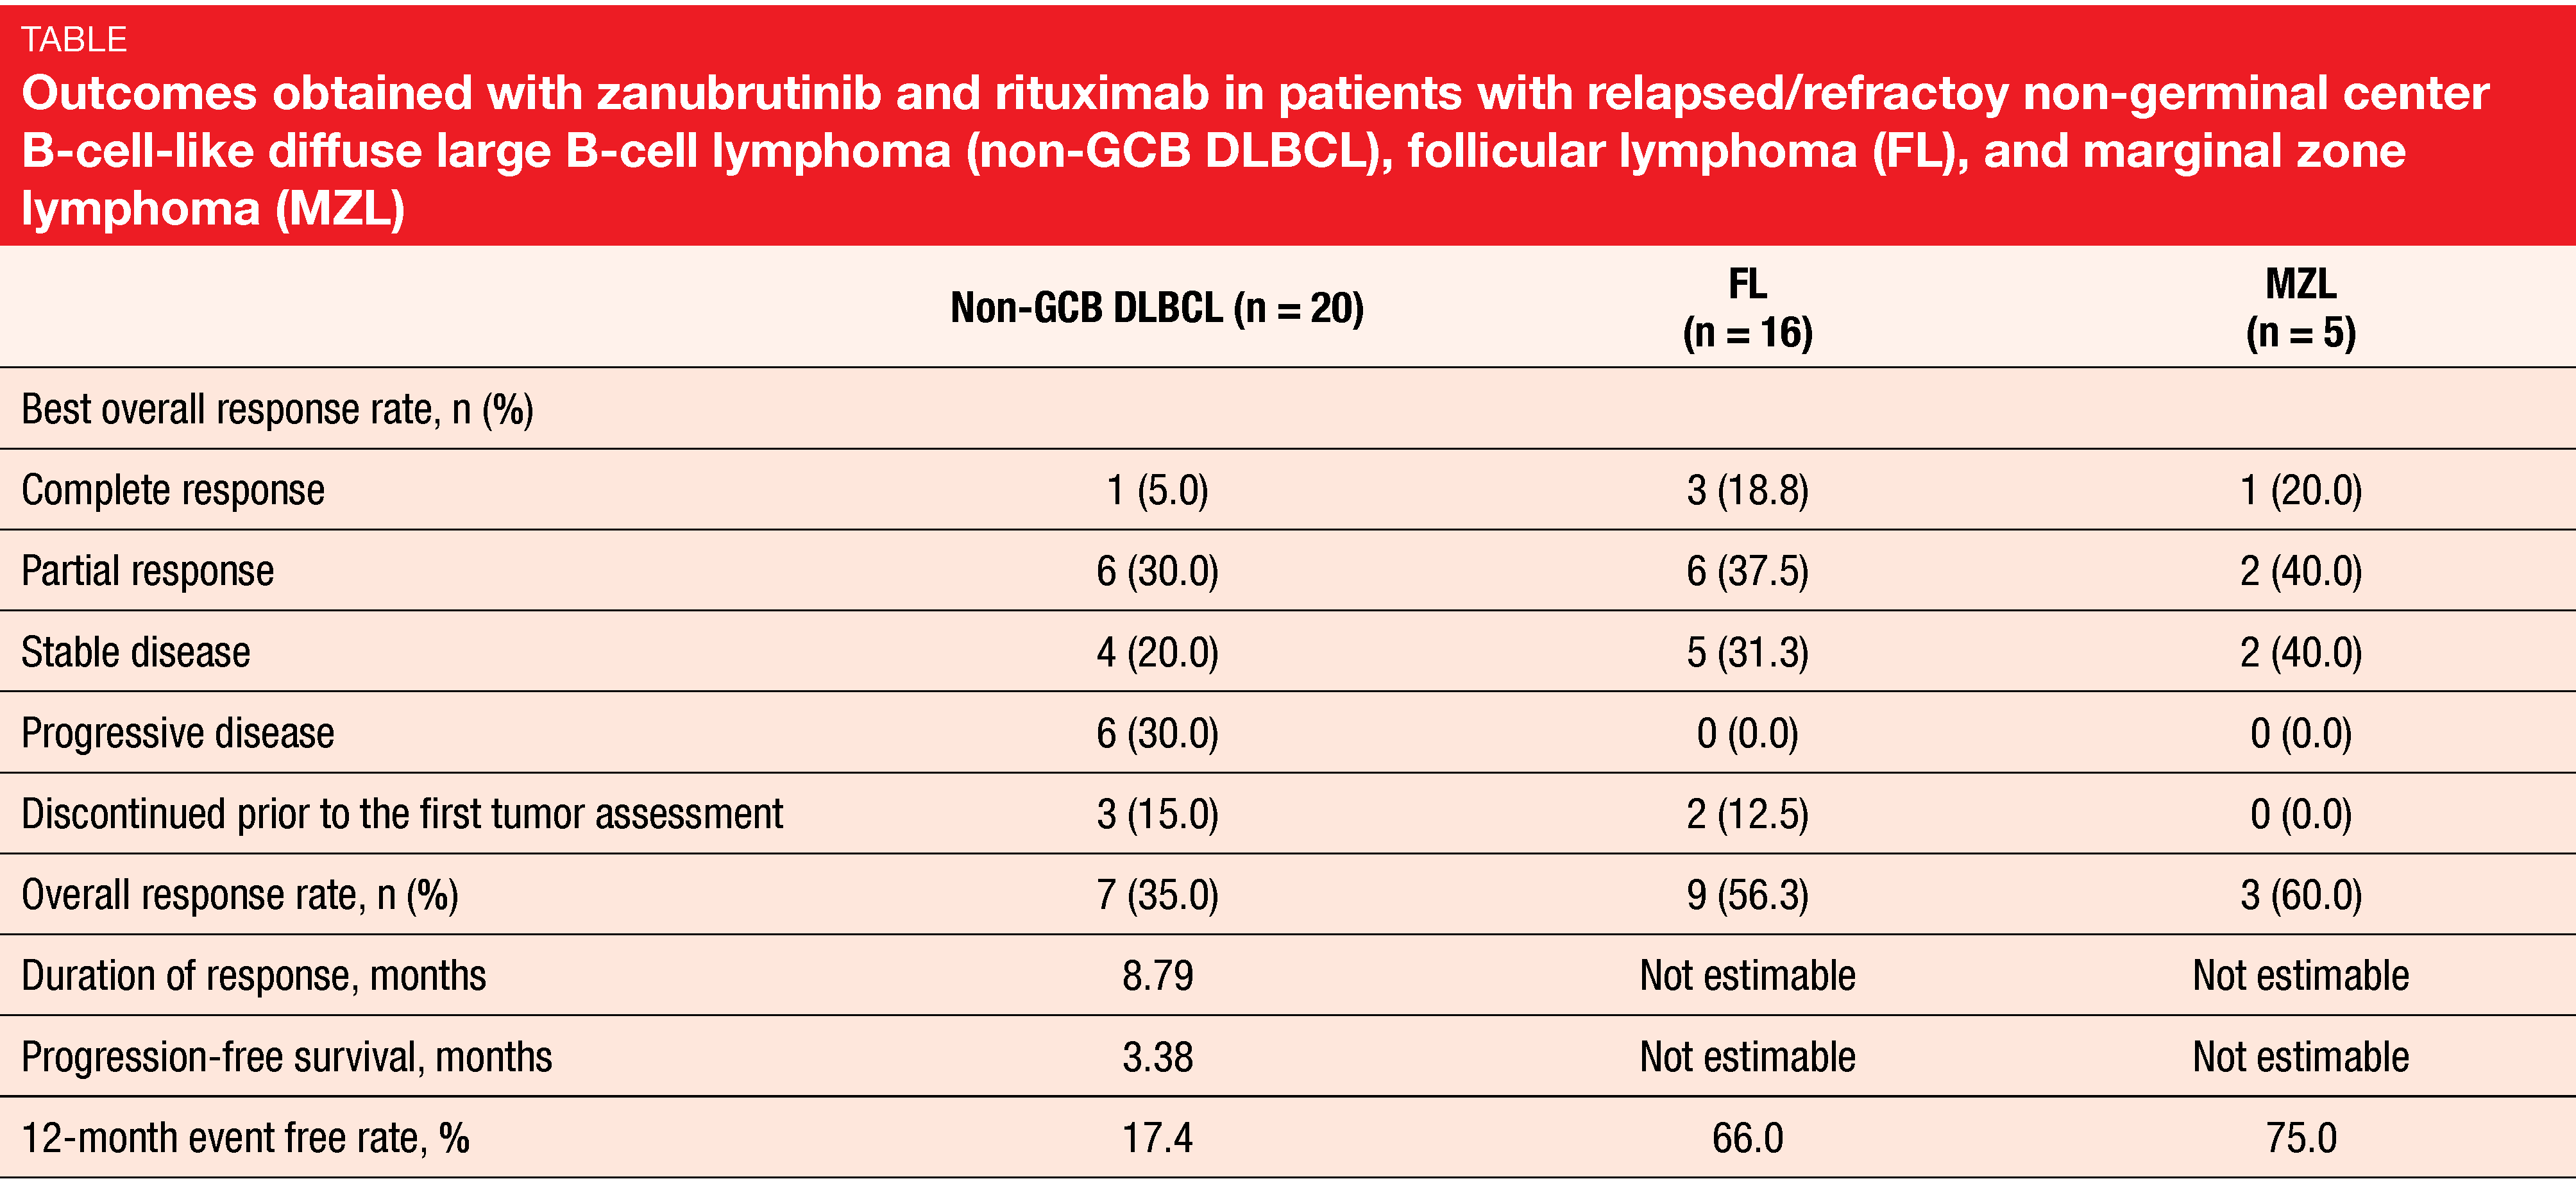 Table Outcomes obtained with zanubrutinib and rituximab in patients with relapsed/refractoy non-germinal center B-cell-like diffuse large B-cell lymphoma (non-GCB DLBCL), follicular lymphoma (FL), and marginal zone lymphoma (MZL)